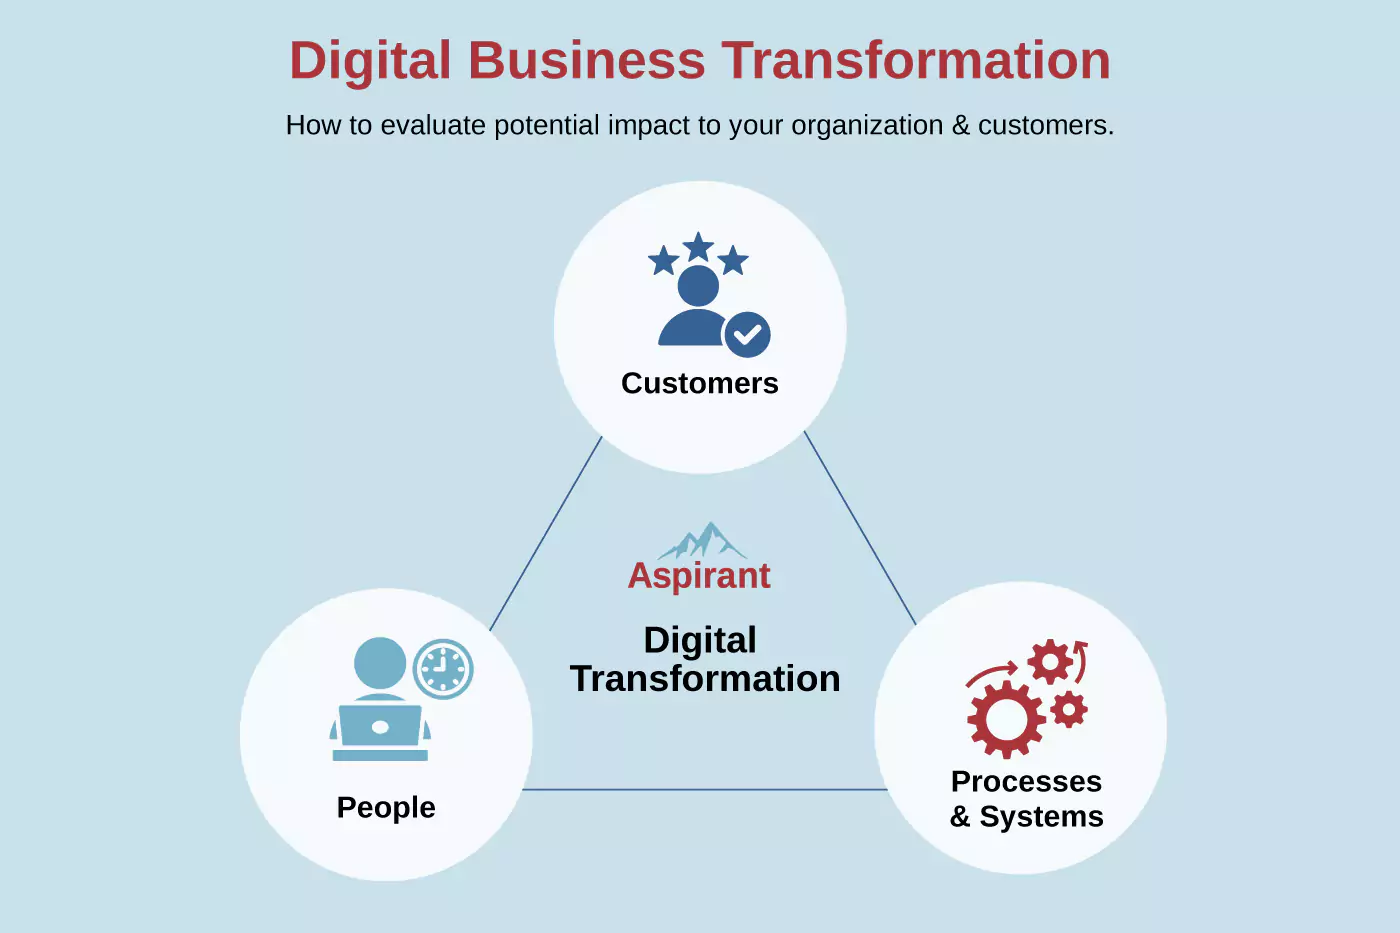 Digital Business Transformation Infographic: How to Evaluate Impact to Organization and Customers